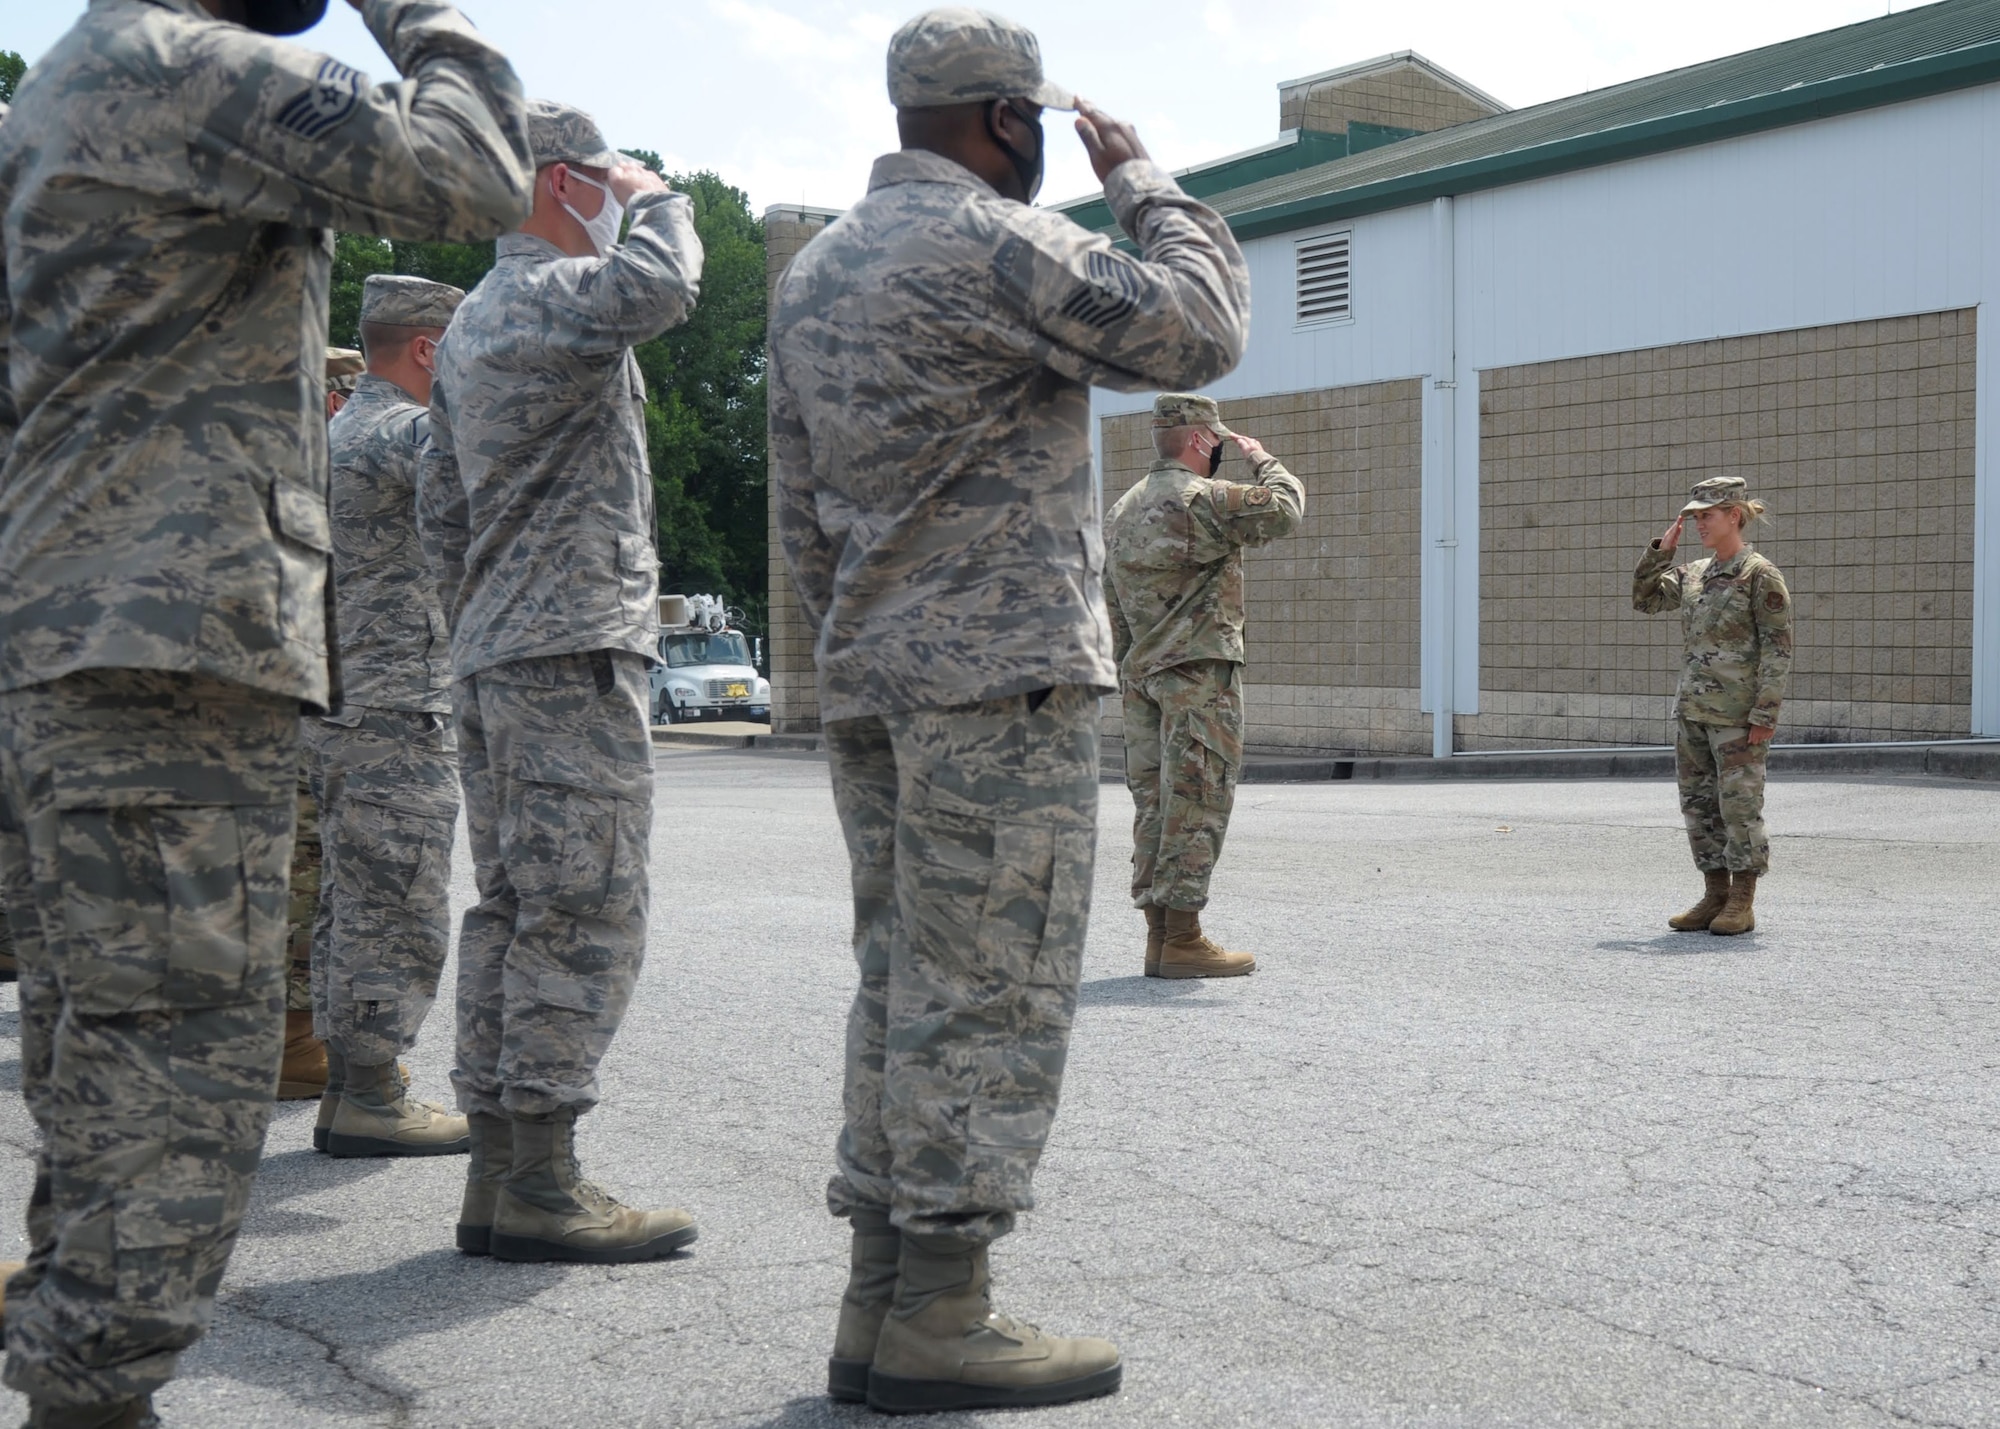 Airmen from the 94th Civil Engineer Squadron render a welcoming salute to Lt. Col. Emily Steinfort, incoming commander of the 94th CES, Aug. 1, 2020, at the 94th CES building. Steinfort plans to surpass the expectations of Headquarters so that her Airmen are ready for anything. (U.S. Air Force photo by Senior Airman Shelby Thurman)